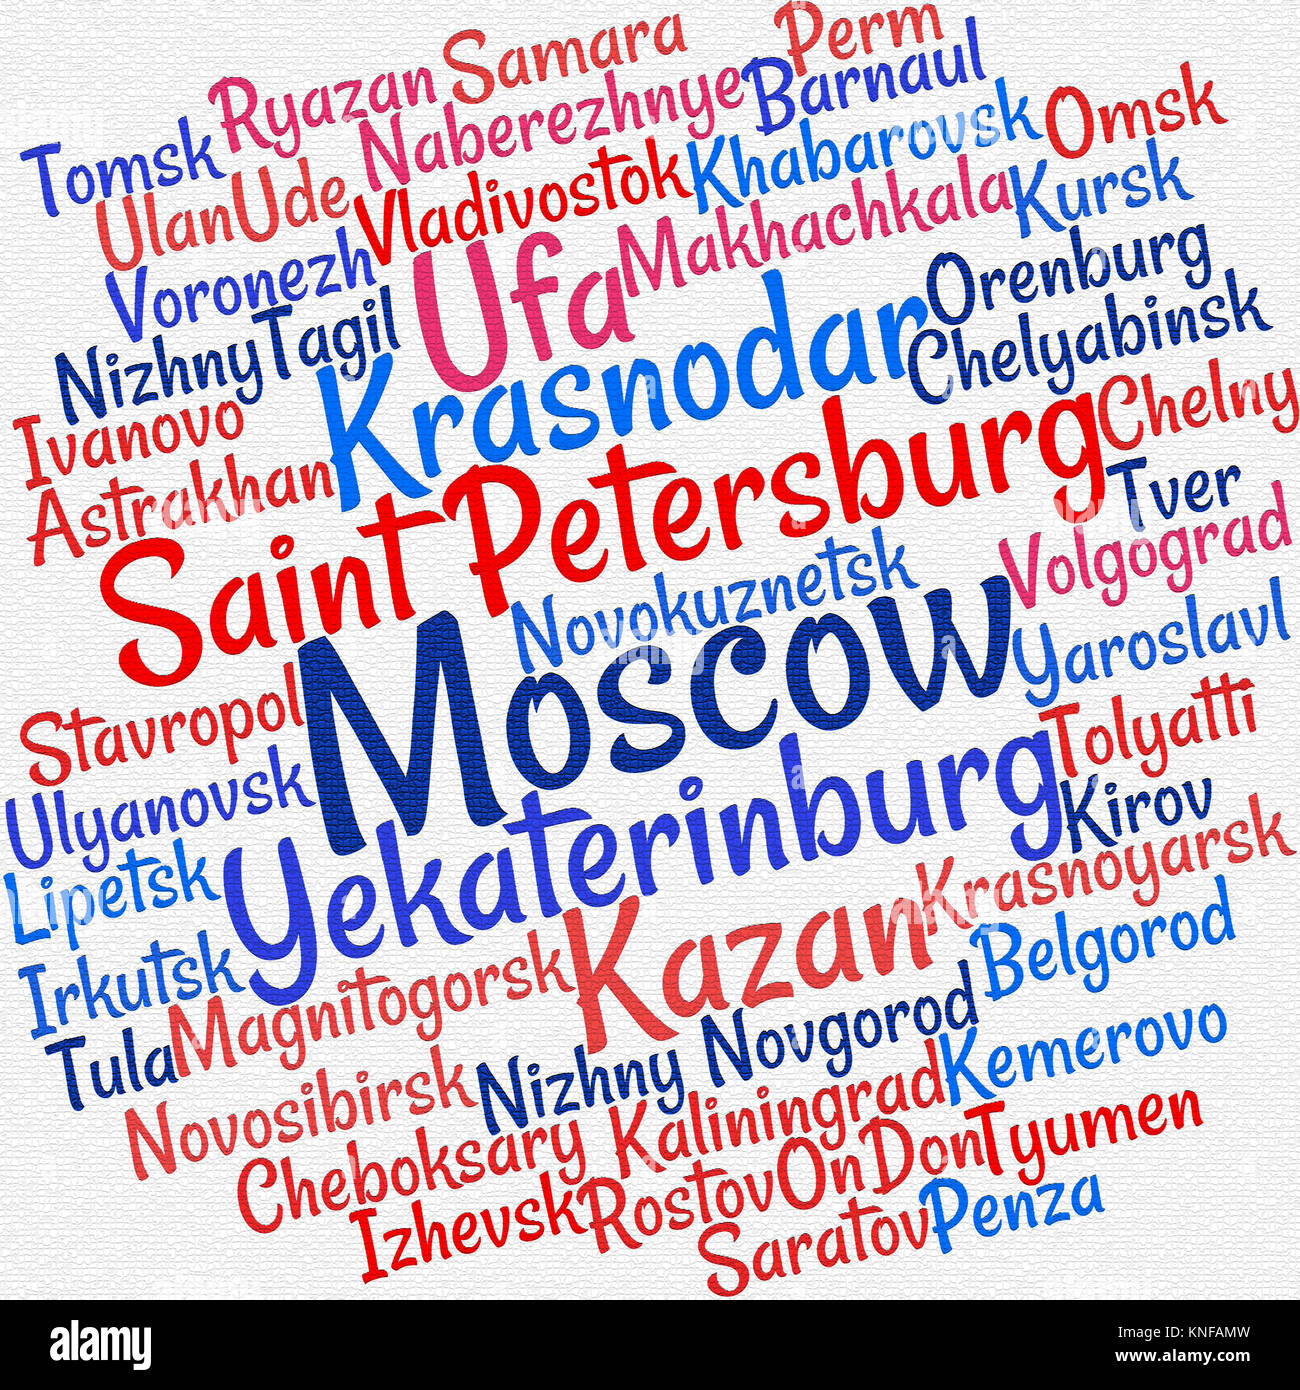 Towns in Russia word cloud concept Stock Photo